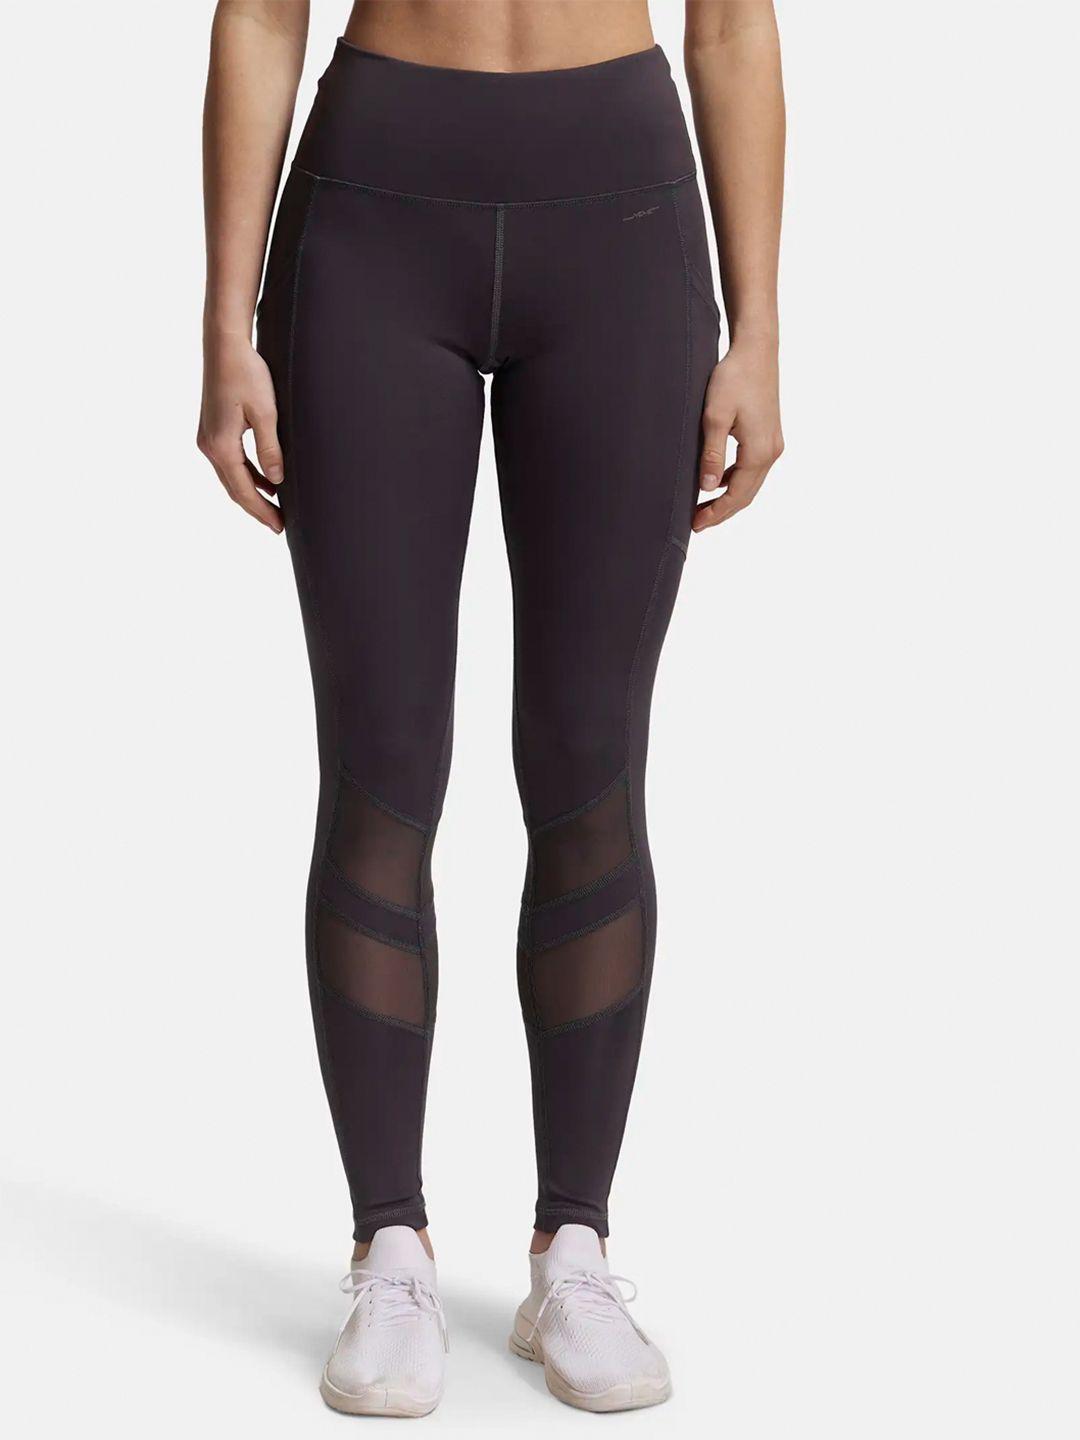 jockey-women-grey-polyester-ankle-length-printed-slim-fit-tights